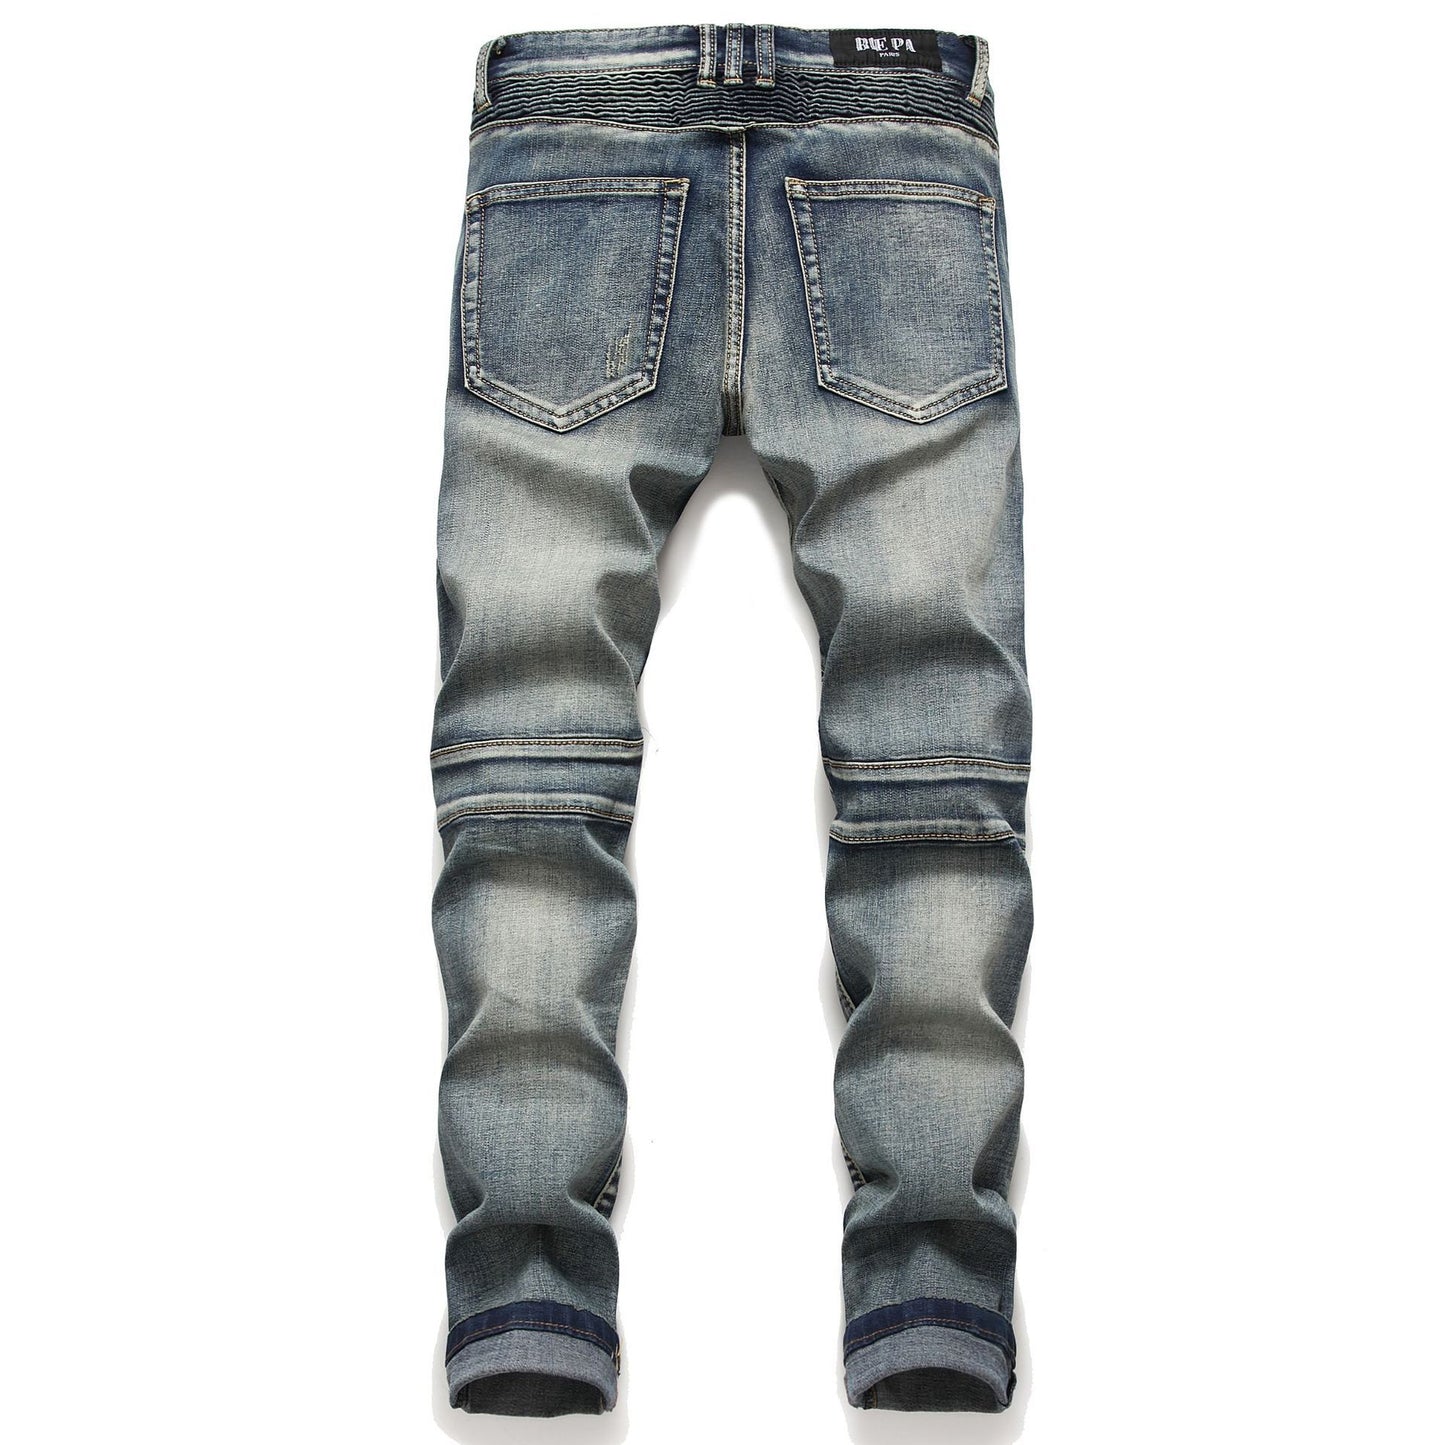 Retro Crumpled Hole Patch Elastic Straight Skinny Jeans